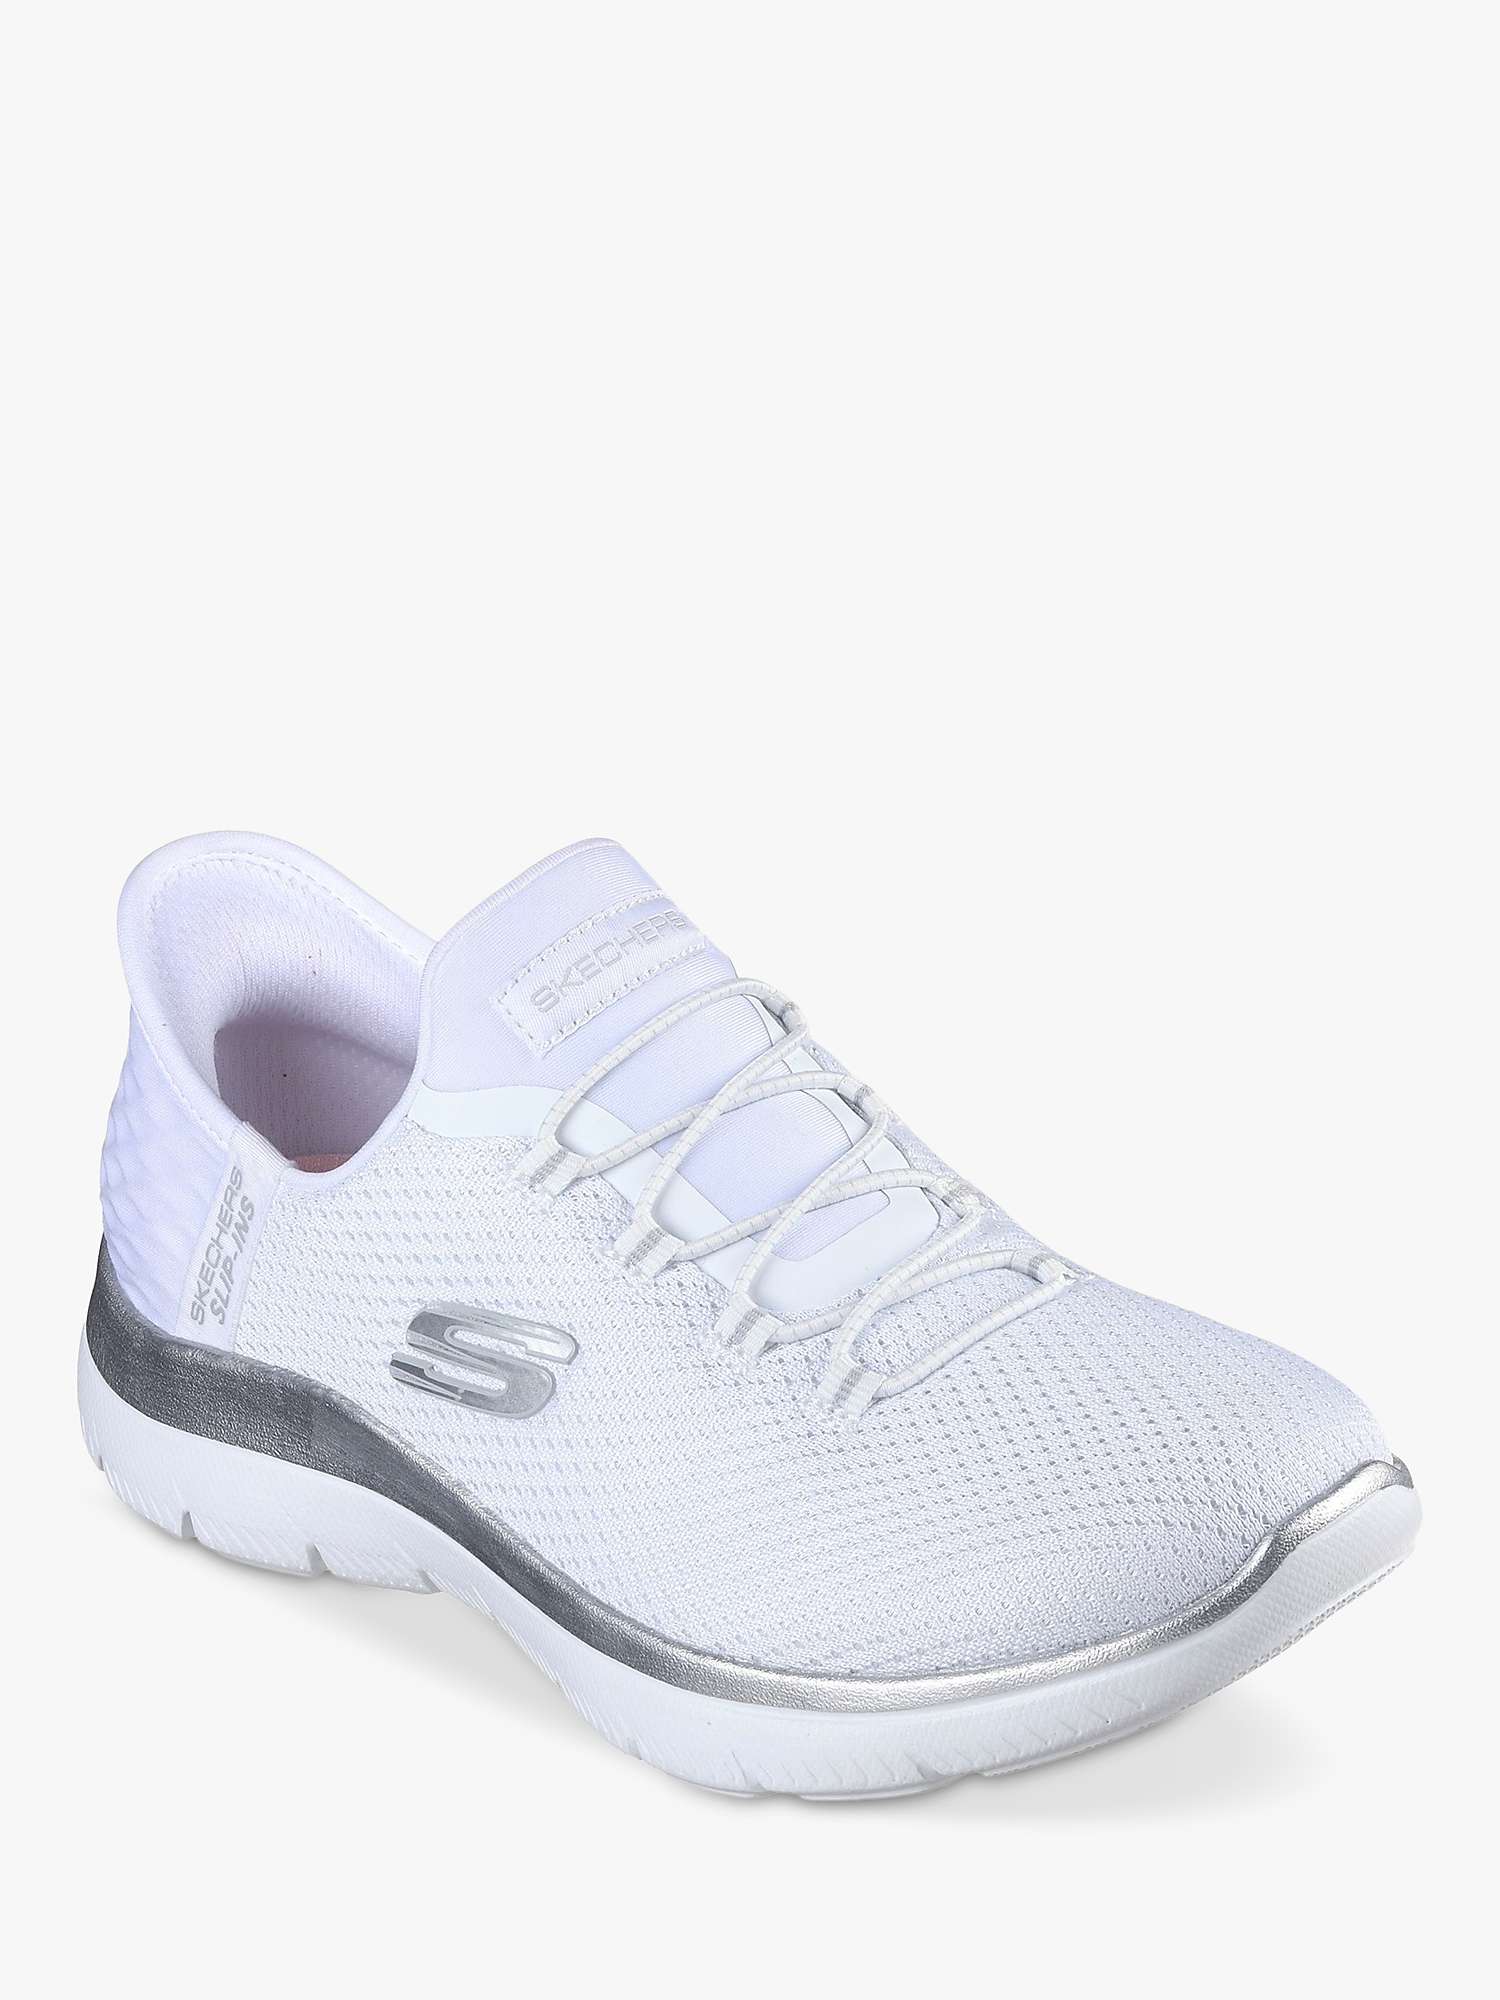 Buy Skechers Summits Diamond Dream Trainers, White/Silver Online at johnlewis.com